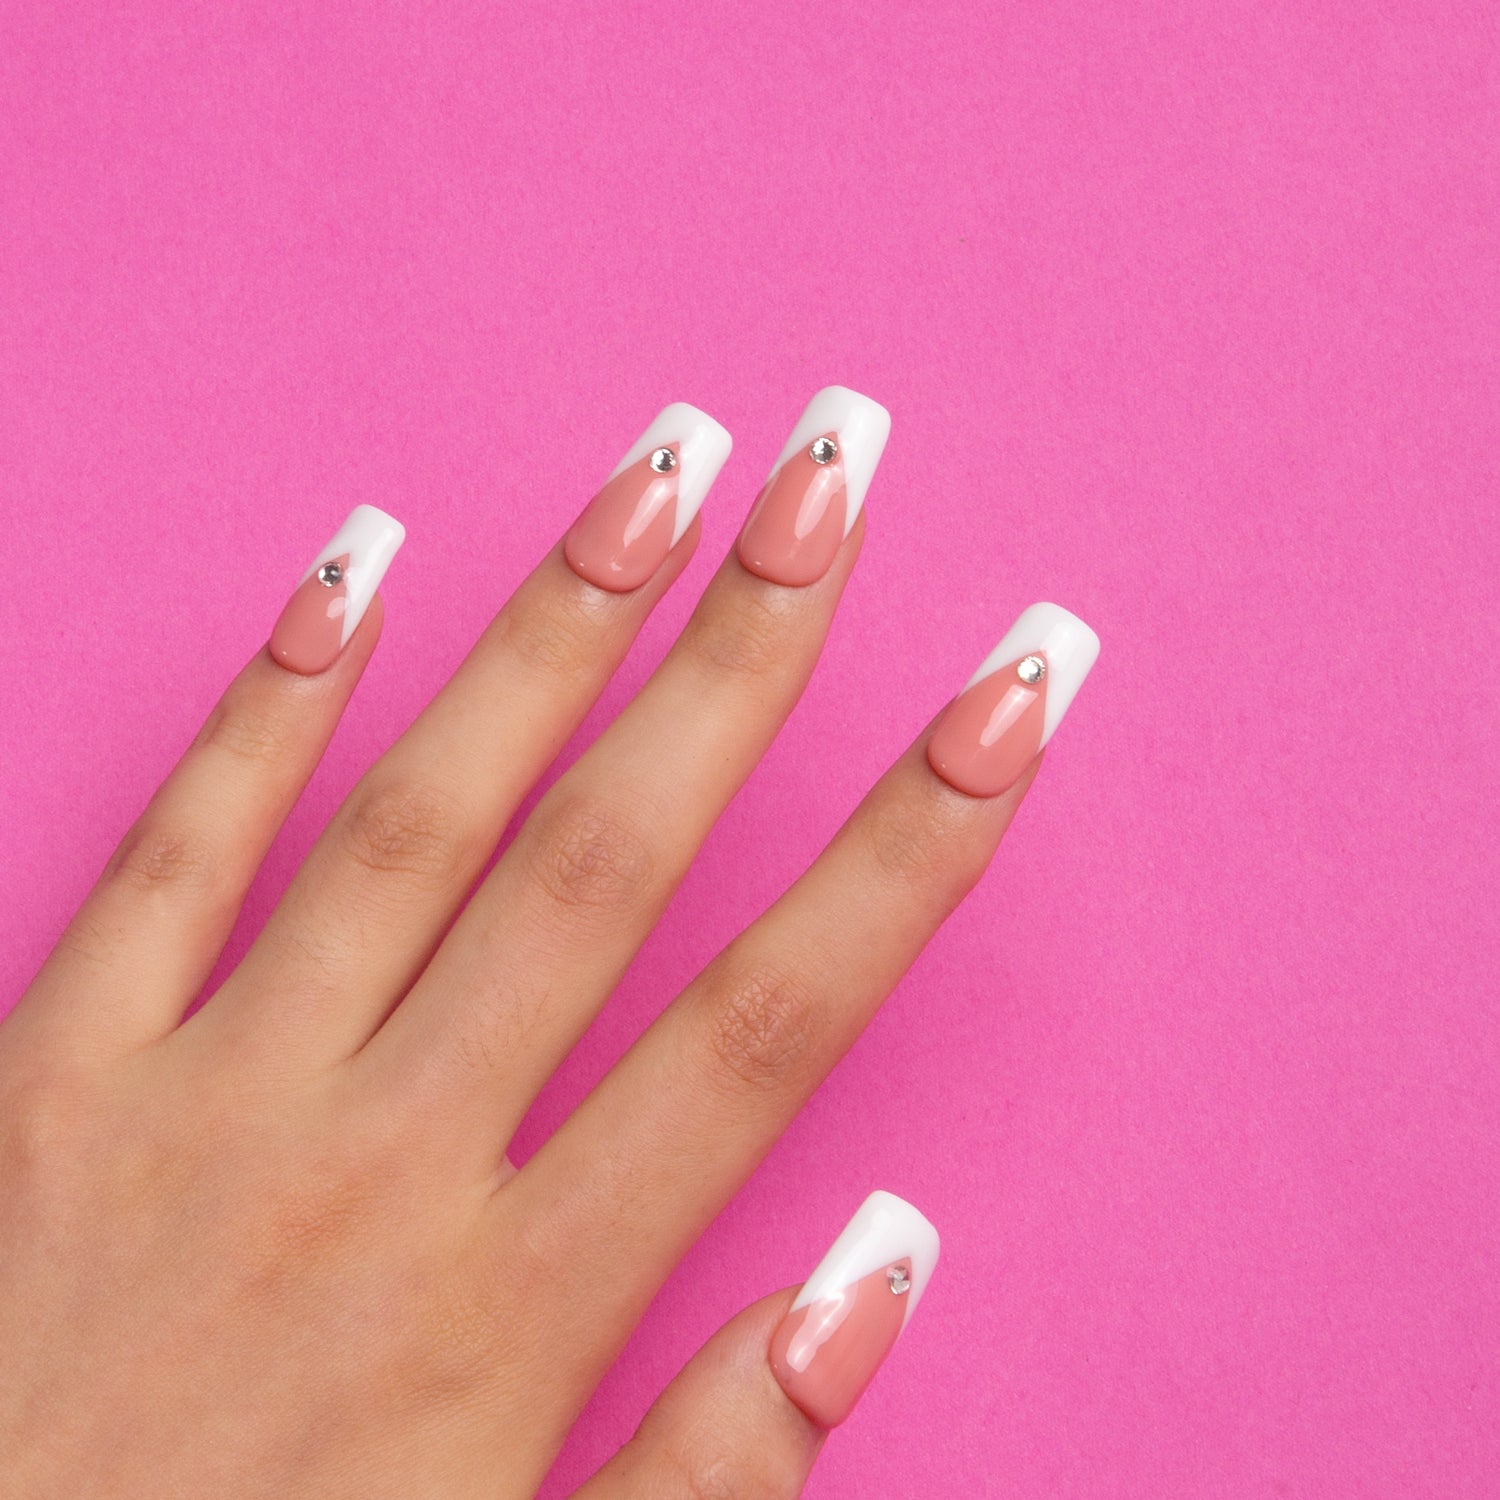 Hand displaying Eternal Polaris press-on nails with white triangle French tips and rhinestones, set against a pink background. Ideal for elegance and sophistication.